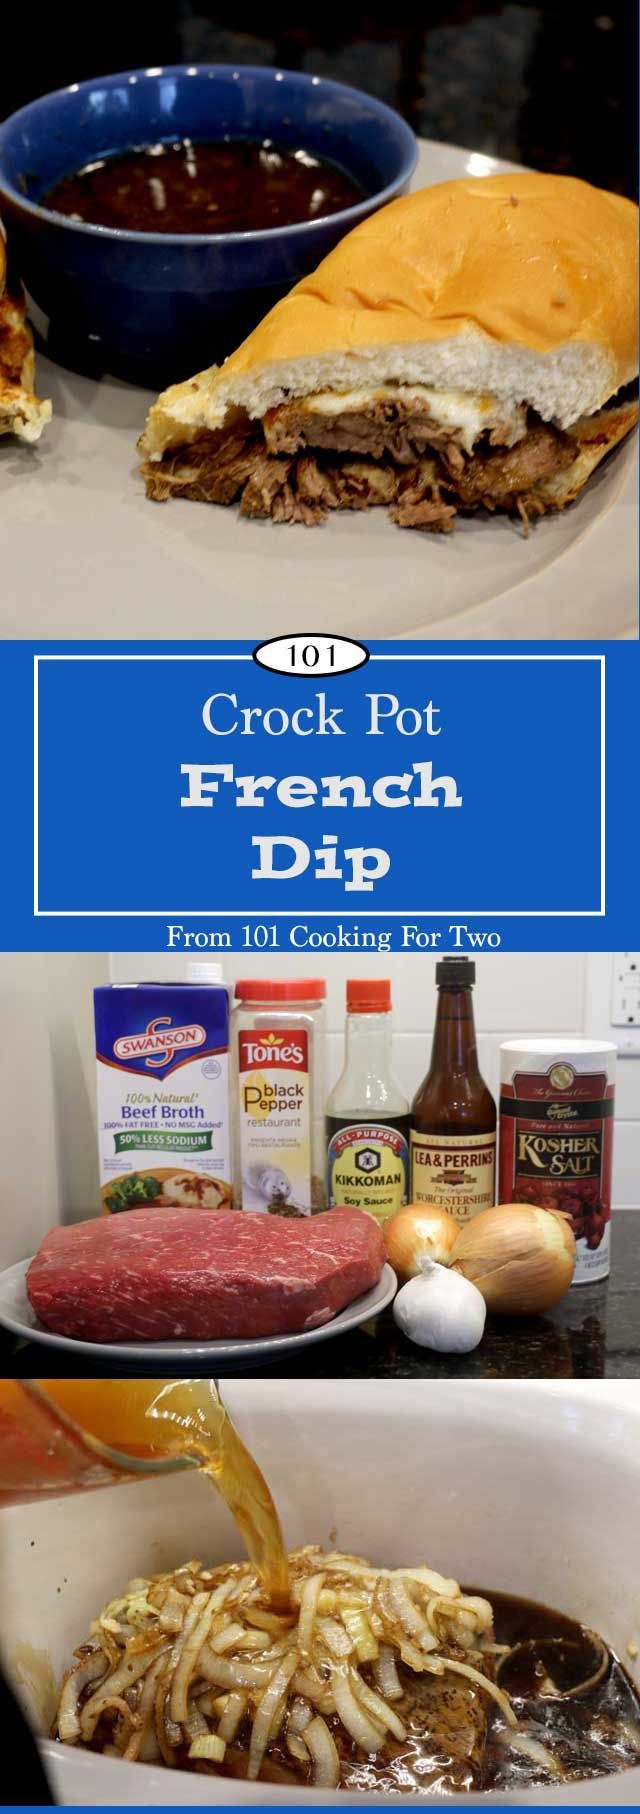 Crock Pot French Dip from 101 Cooking for Two